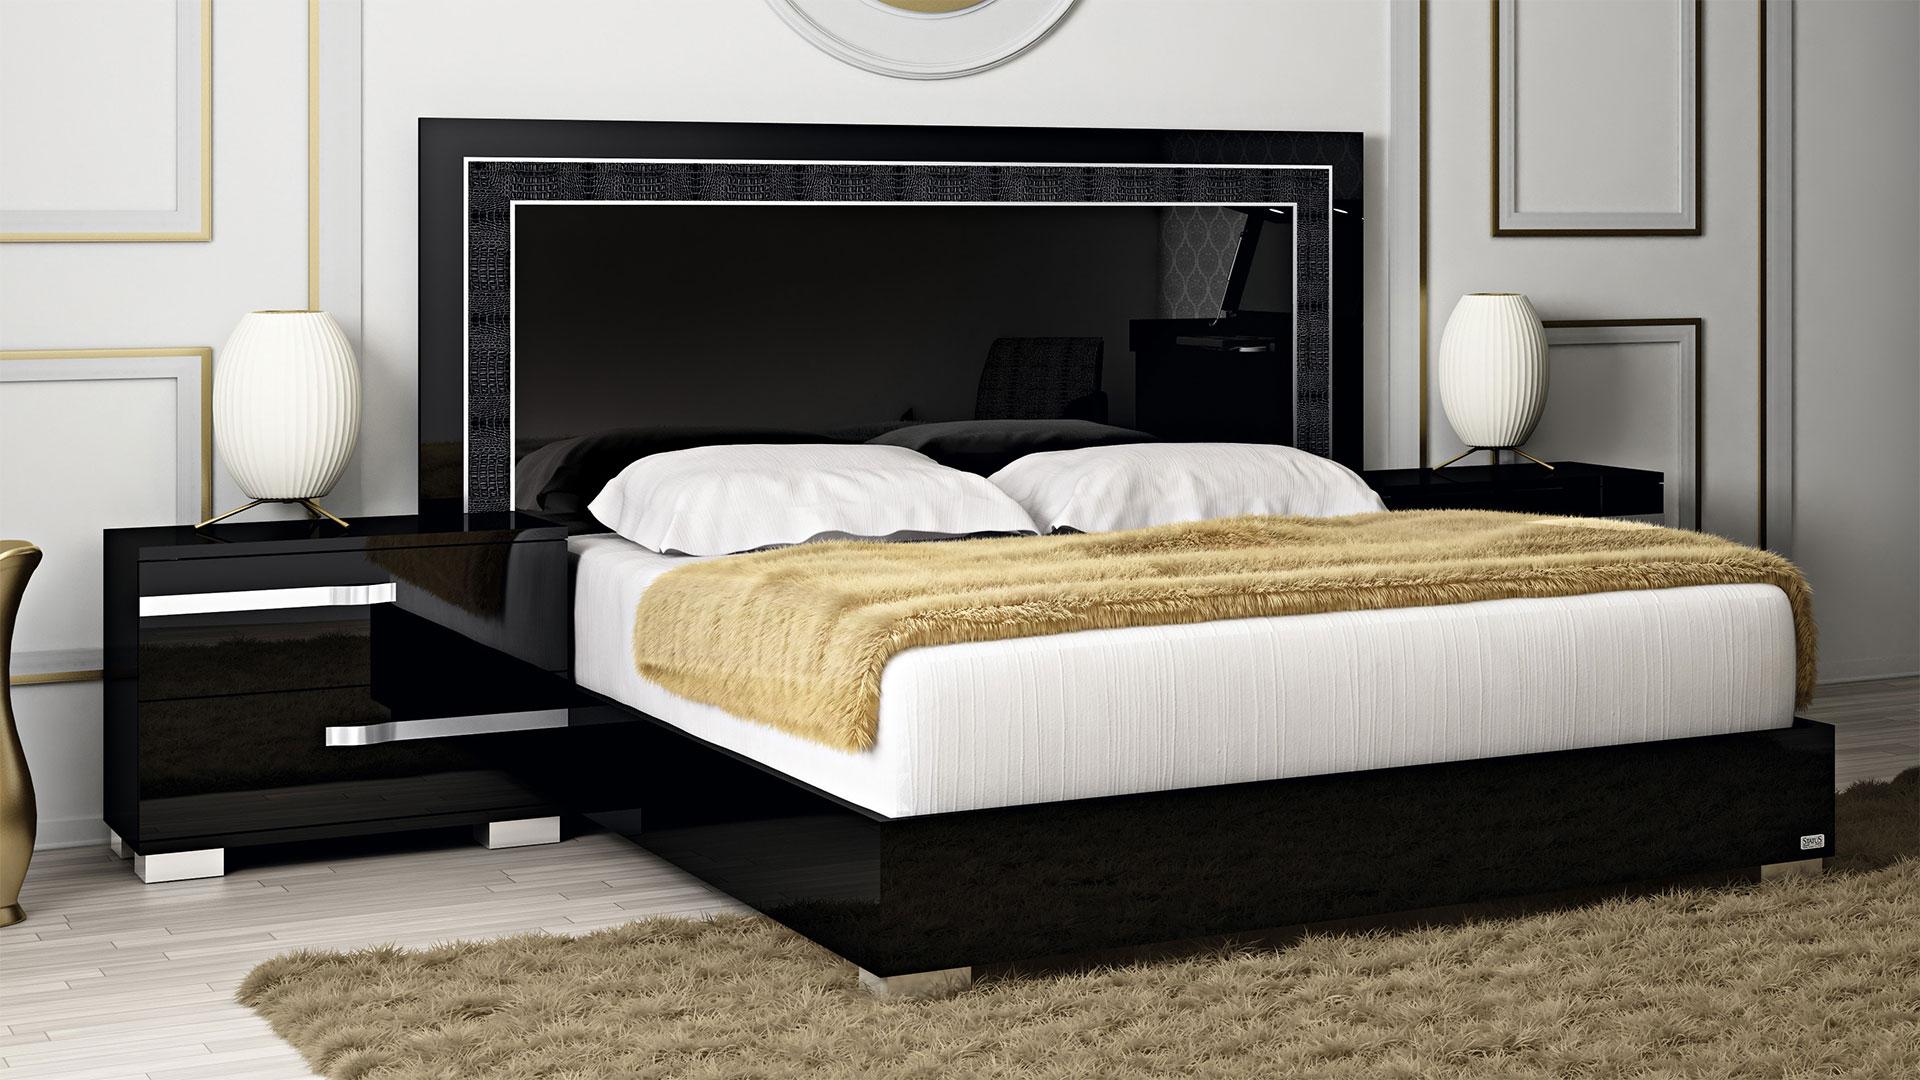 

    
At Home USA Volare Black High Gloss Lacquer Queen Bed Contemporary Made in Italy
